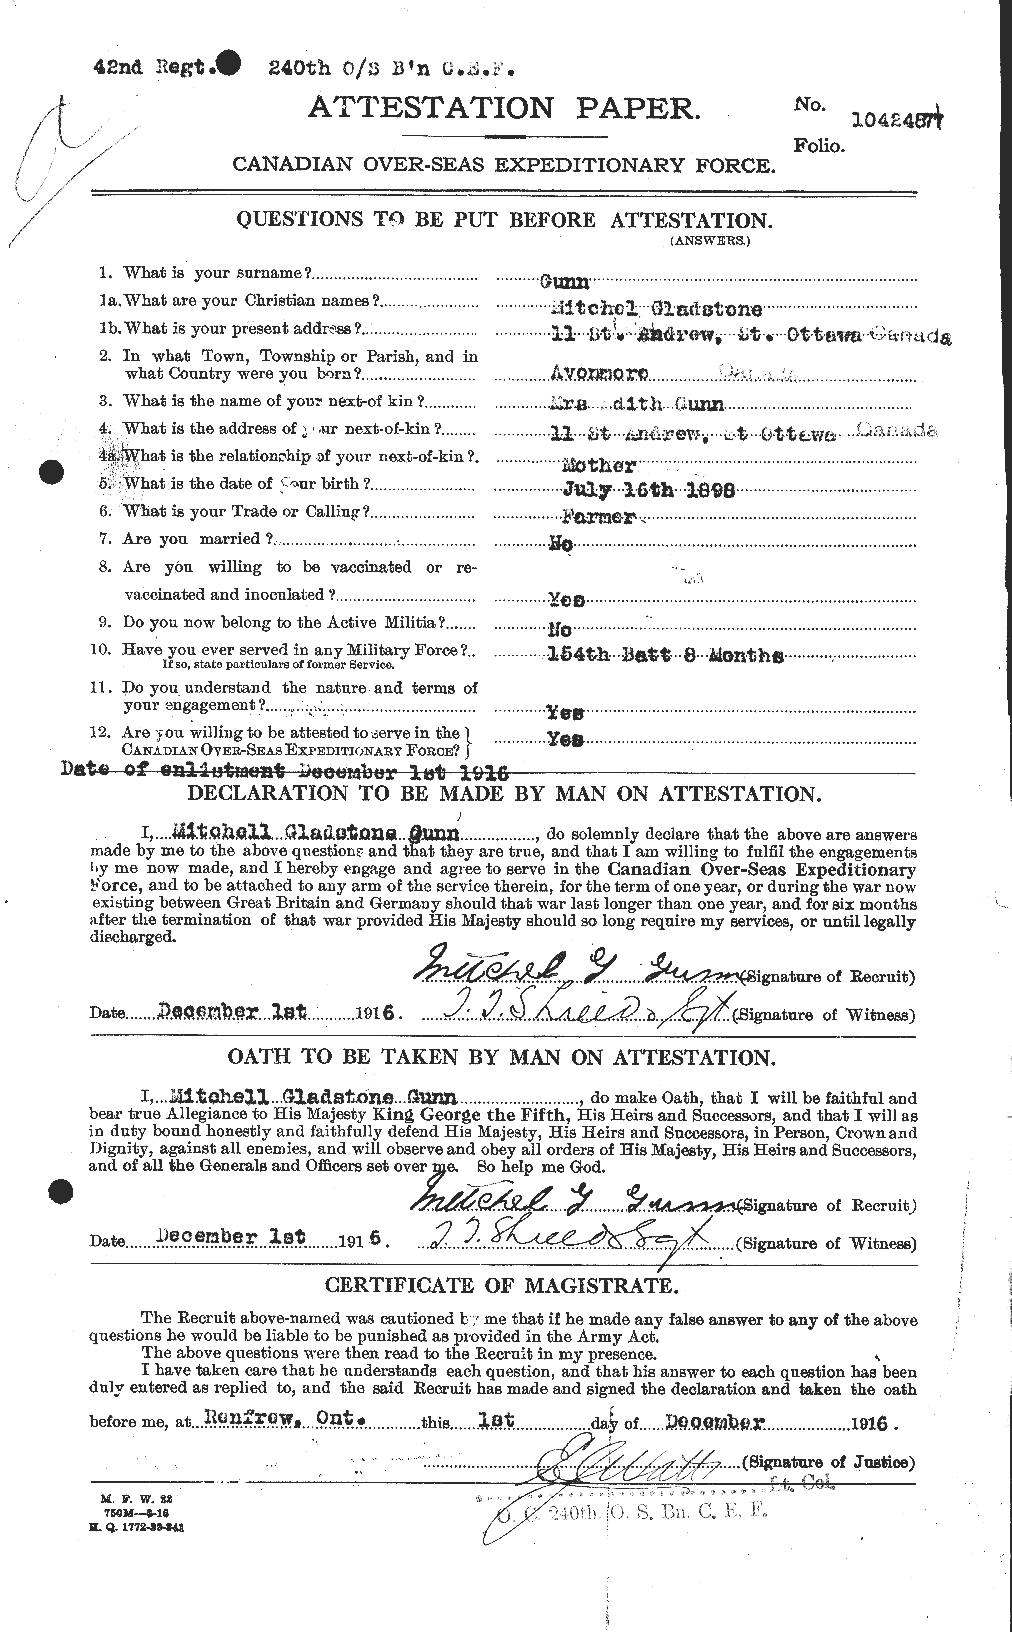 Personnel Records of the First World War - CEF 369246a